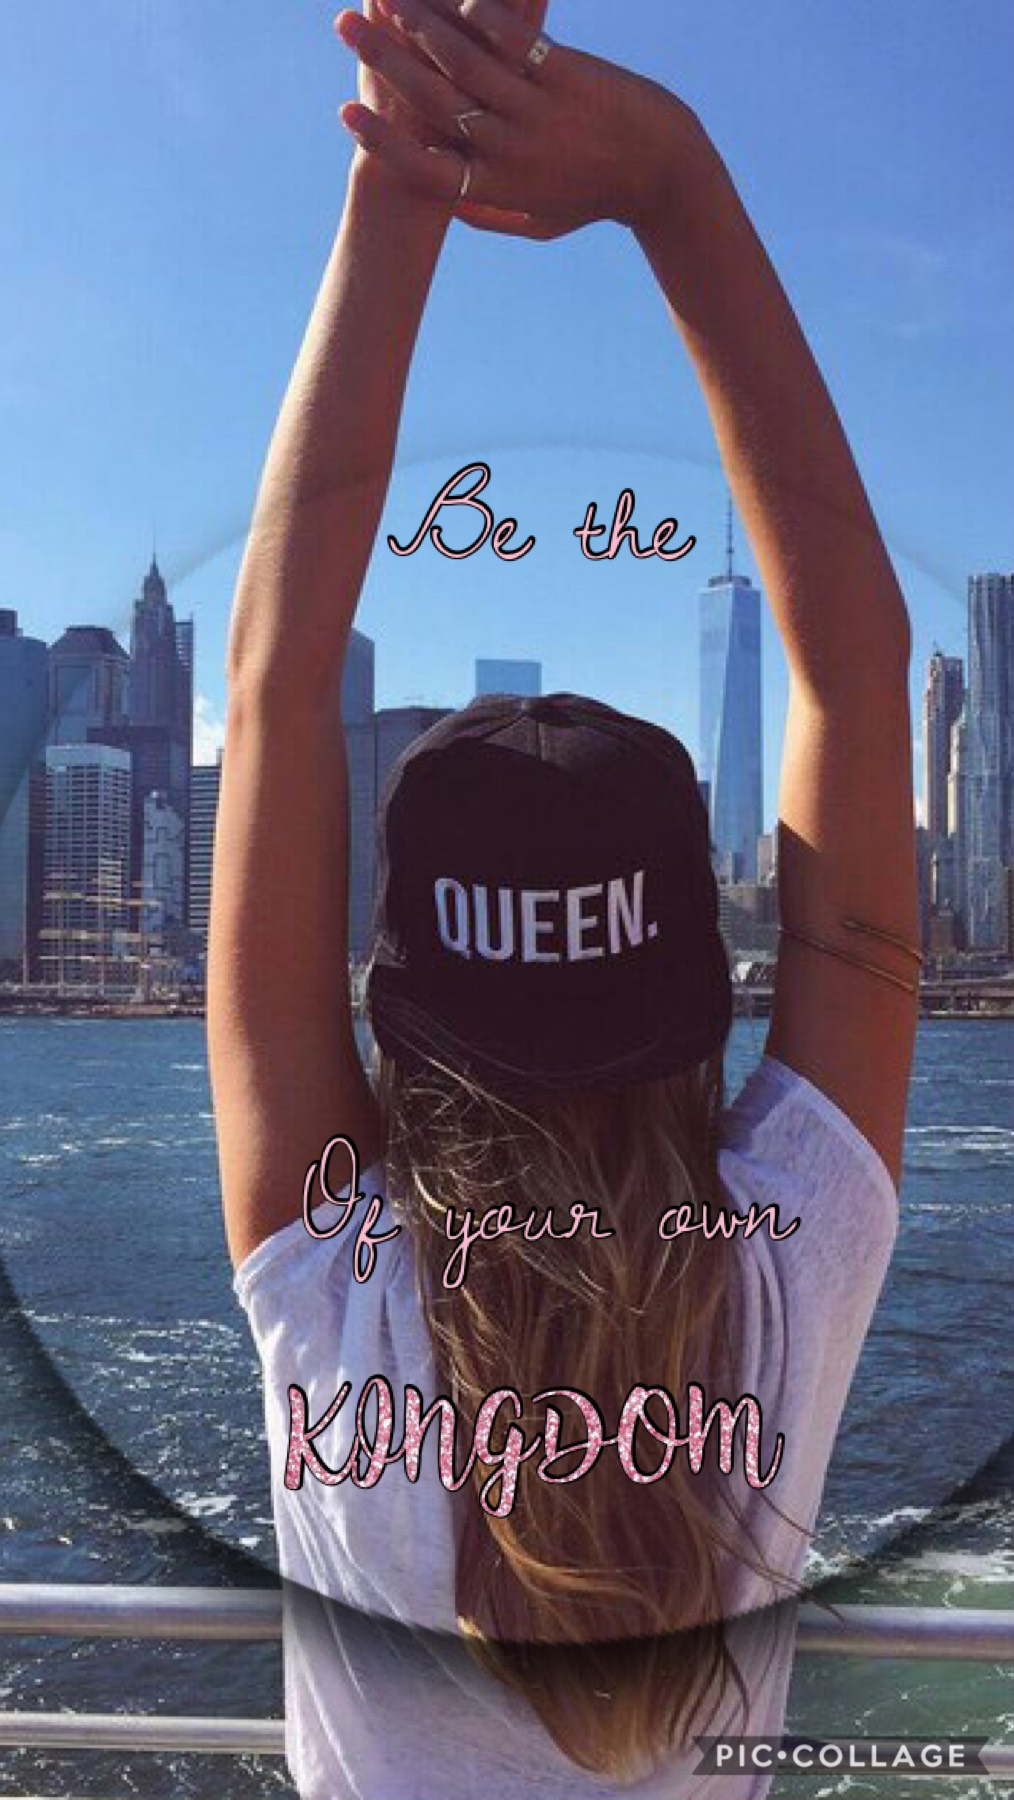 Be the queen of your own KINGDOM! ❤️😘🤩